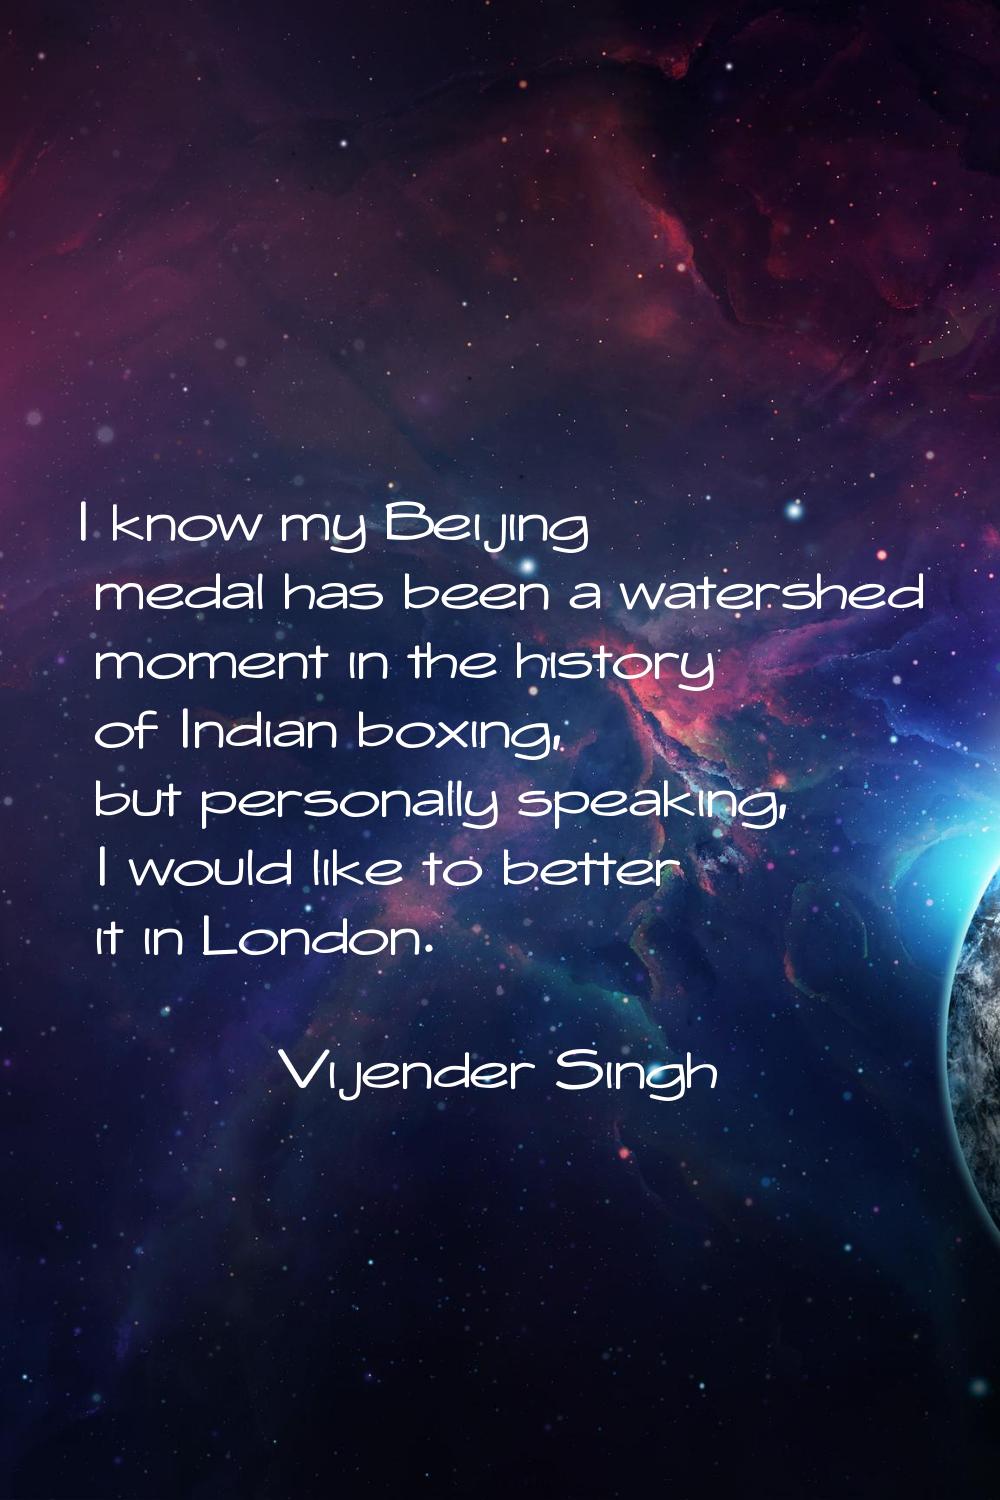 I know my Beijing medal has been a watershed moment in the history of Indian boxing, but personally